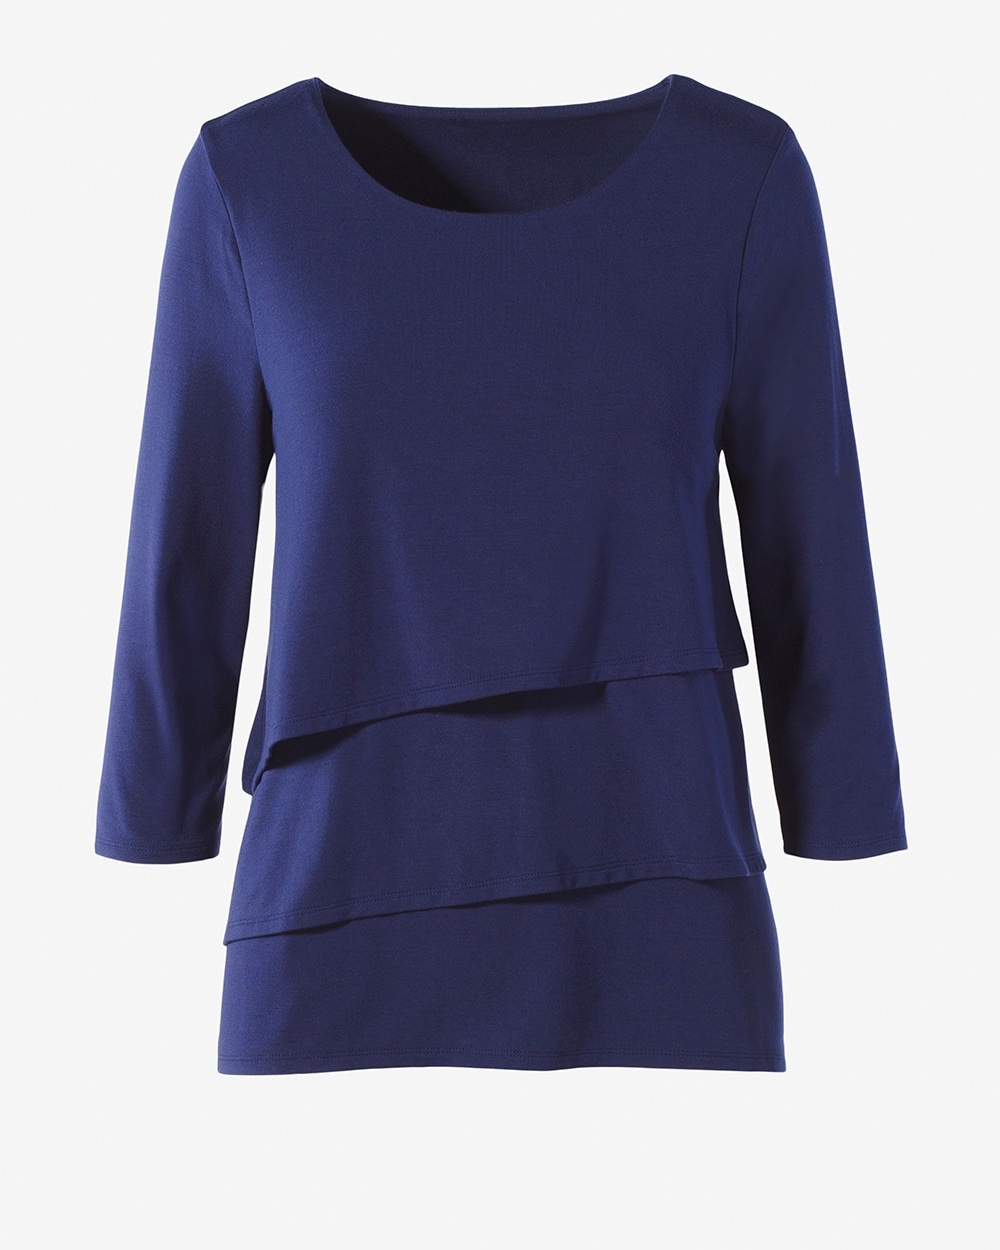 Supremely Soft Triple-Layer Top